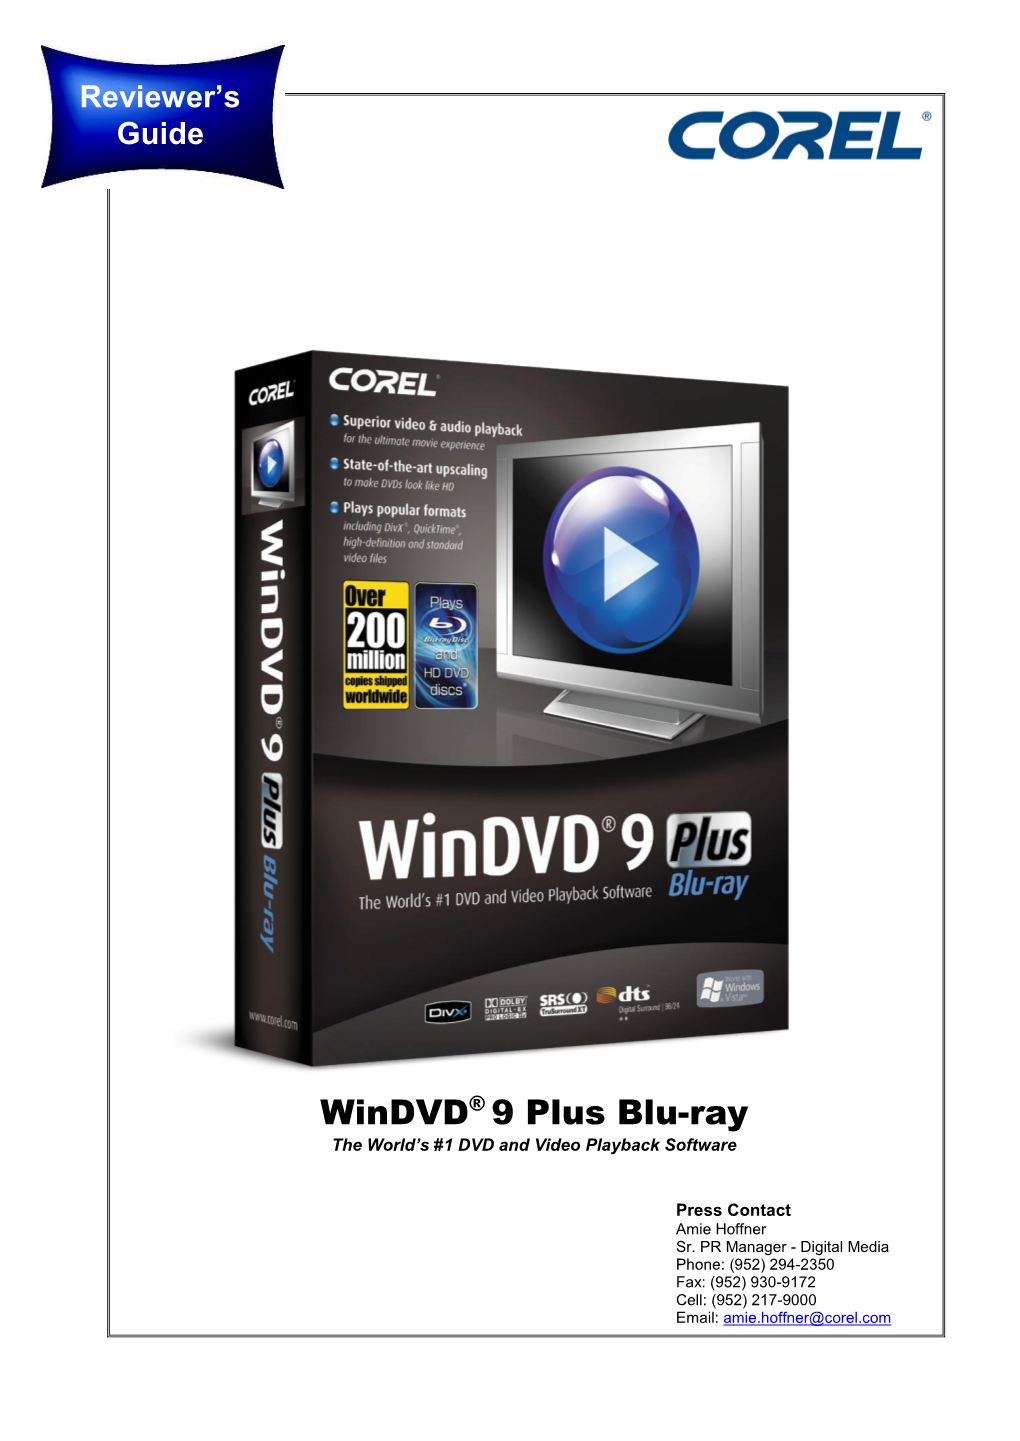 Windvd® 9 Plus Blu-Ray the World’S #1 DVD and Video Playback Software